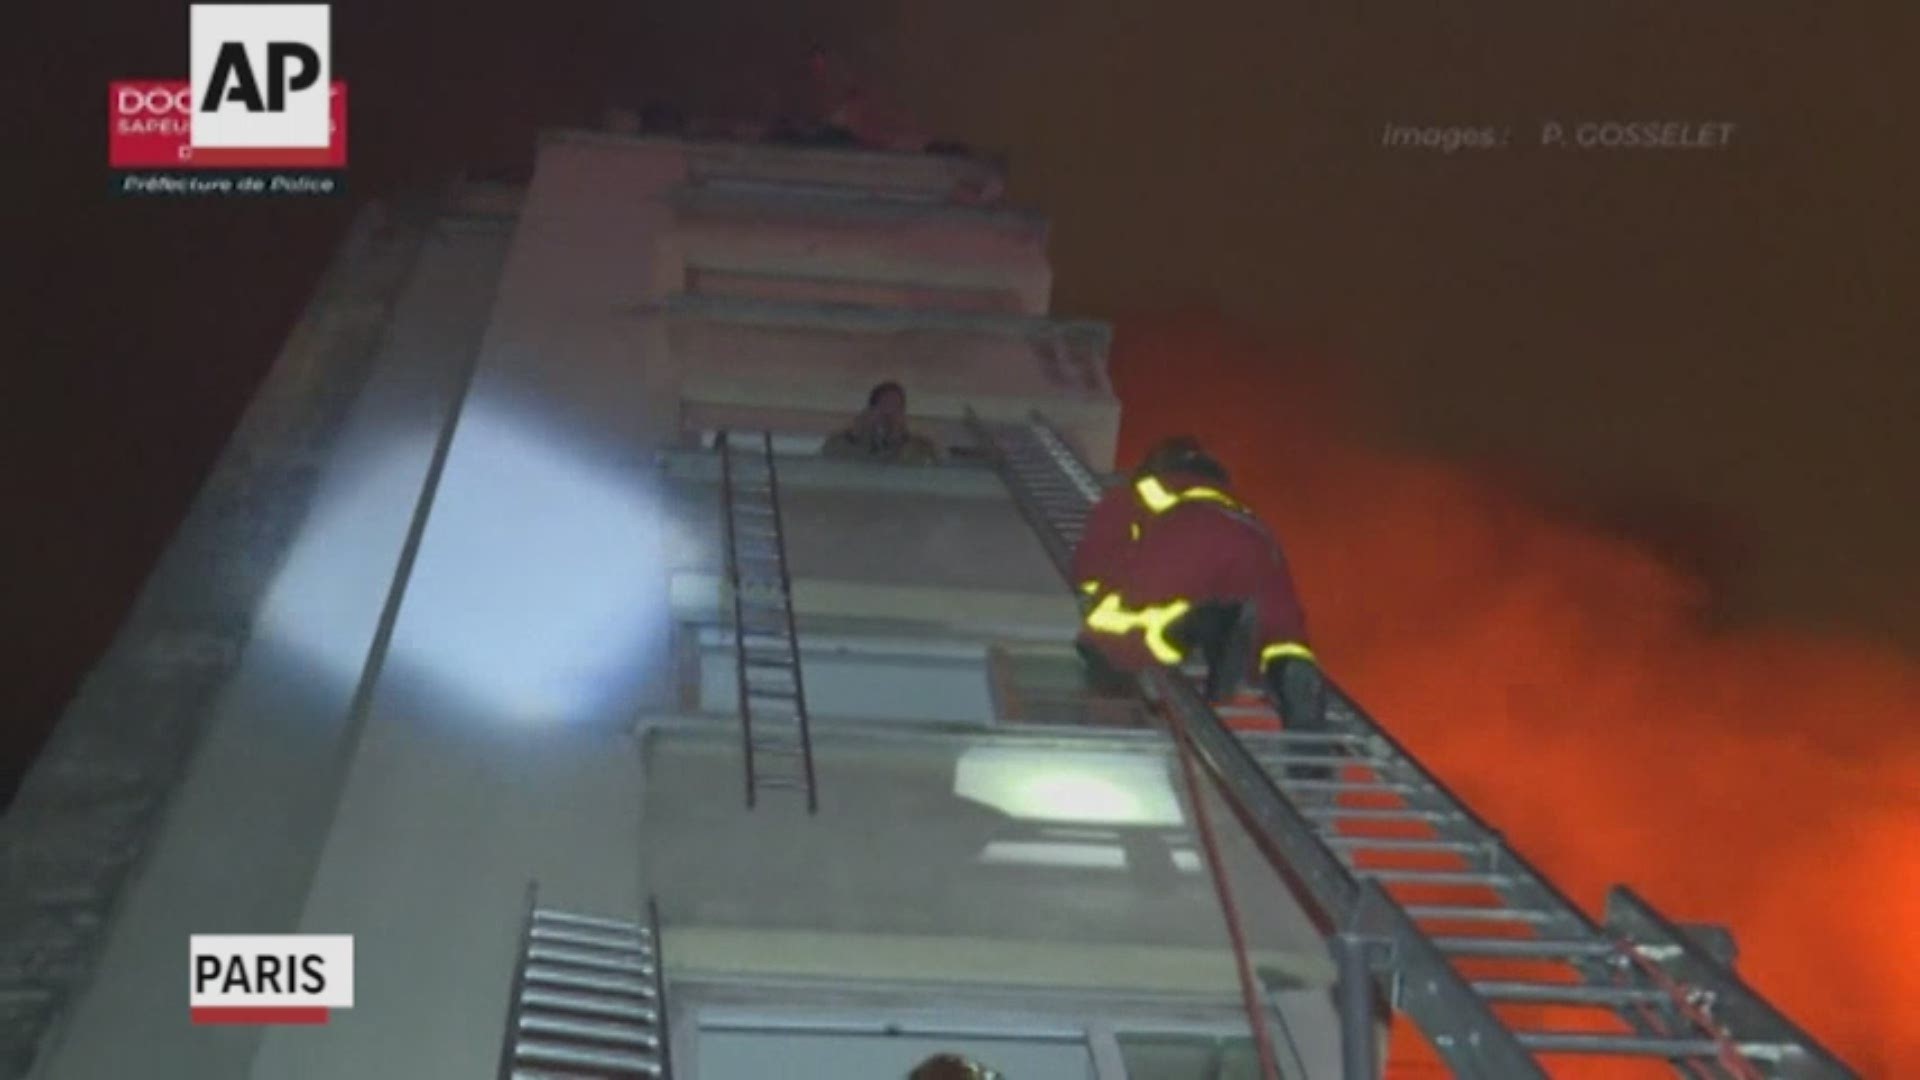 A fire in a Paris apartment building early Tuesday killed at least eight people and sent residents fleeing to the roof or climbing out of windows to escape, authorities said. (Firefighters handout video via AP)